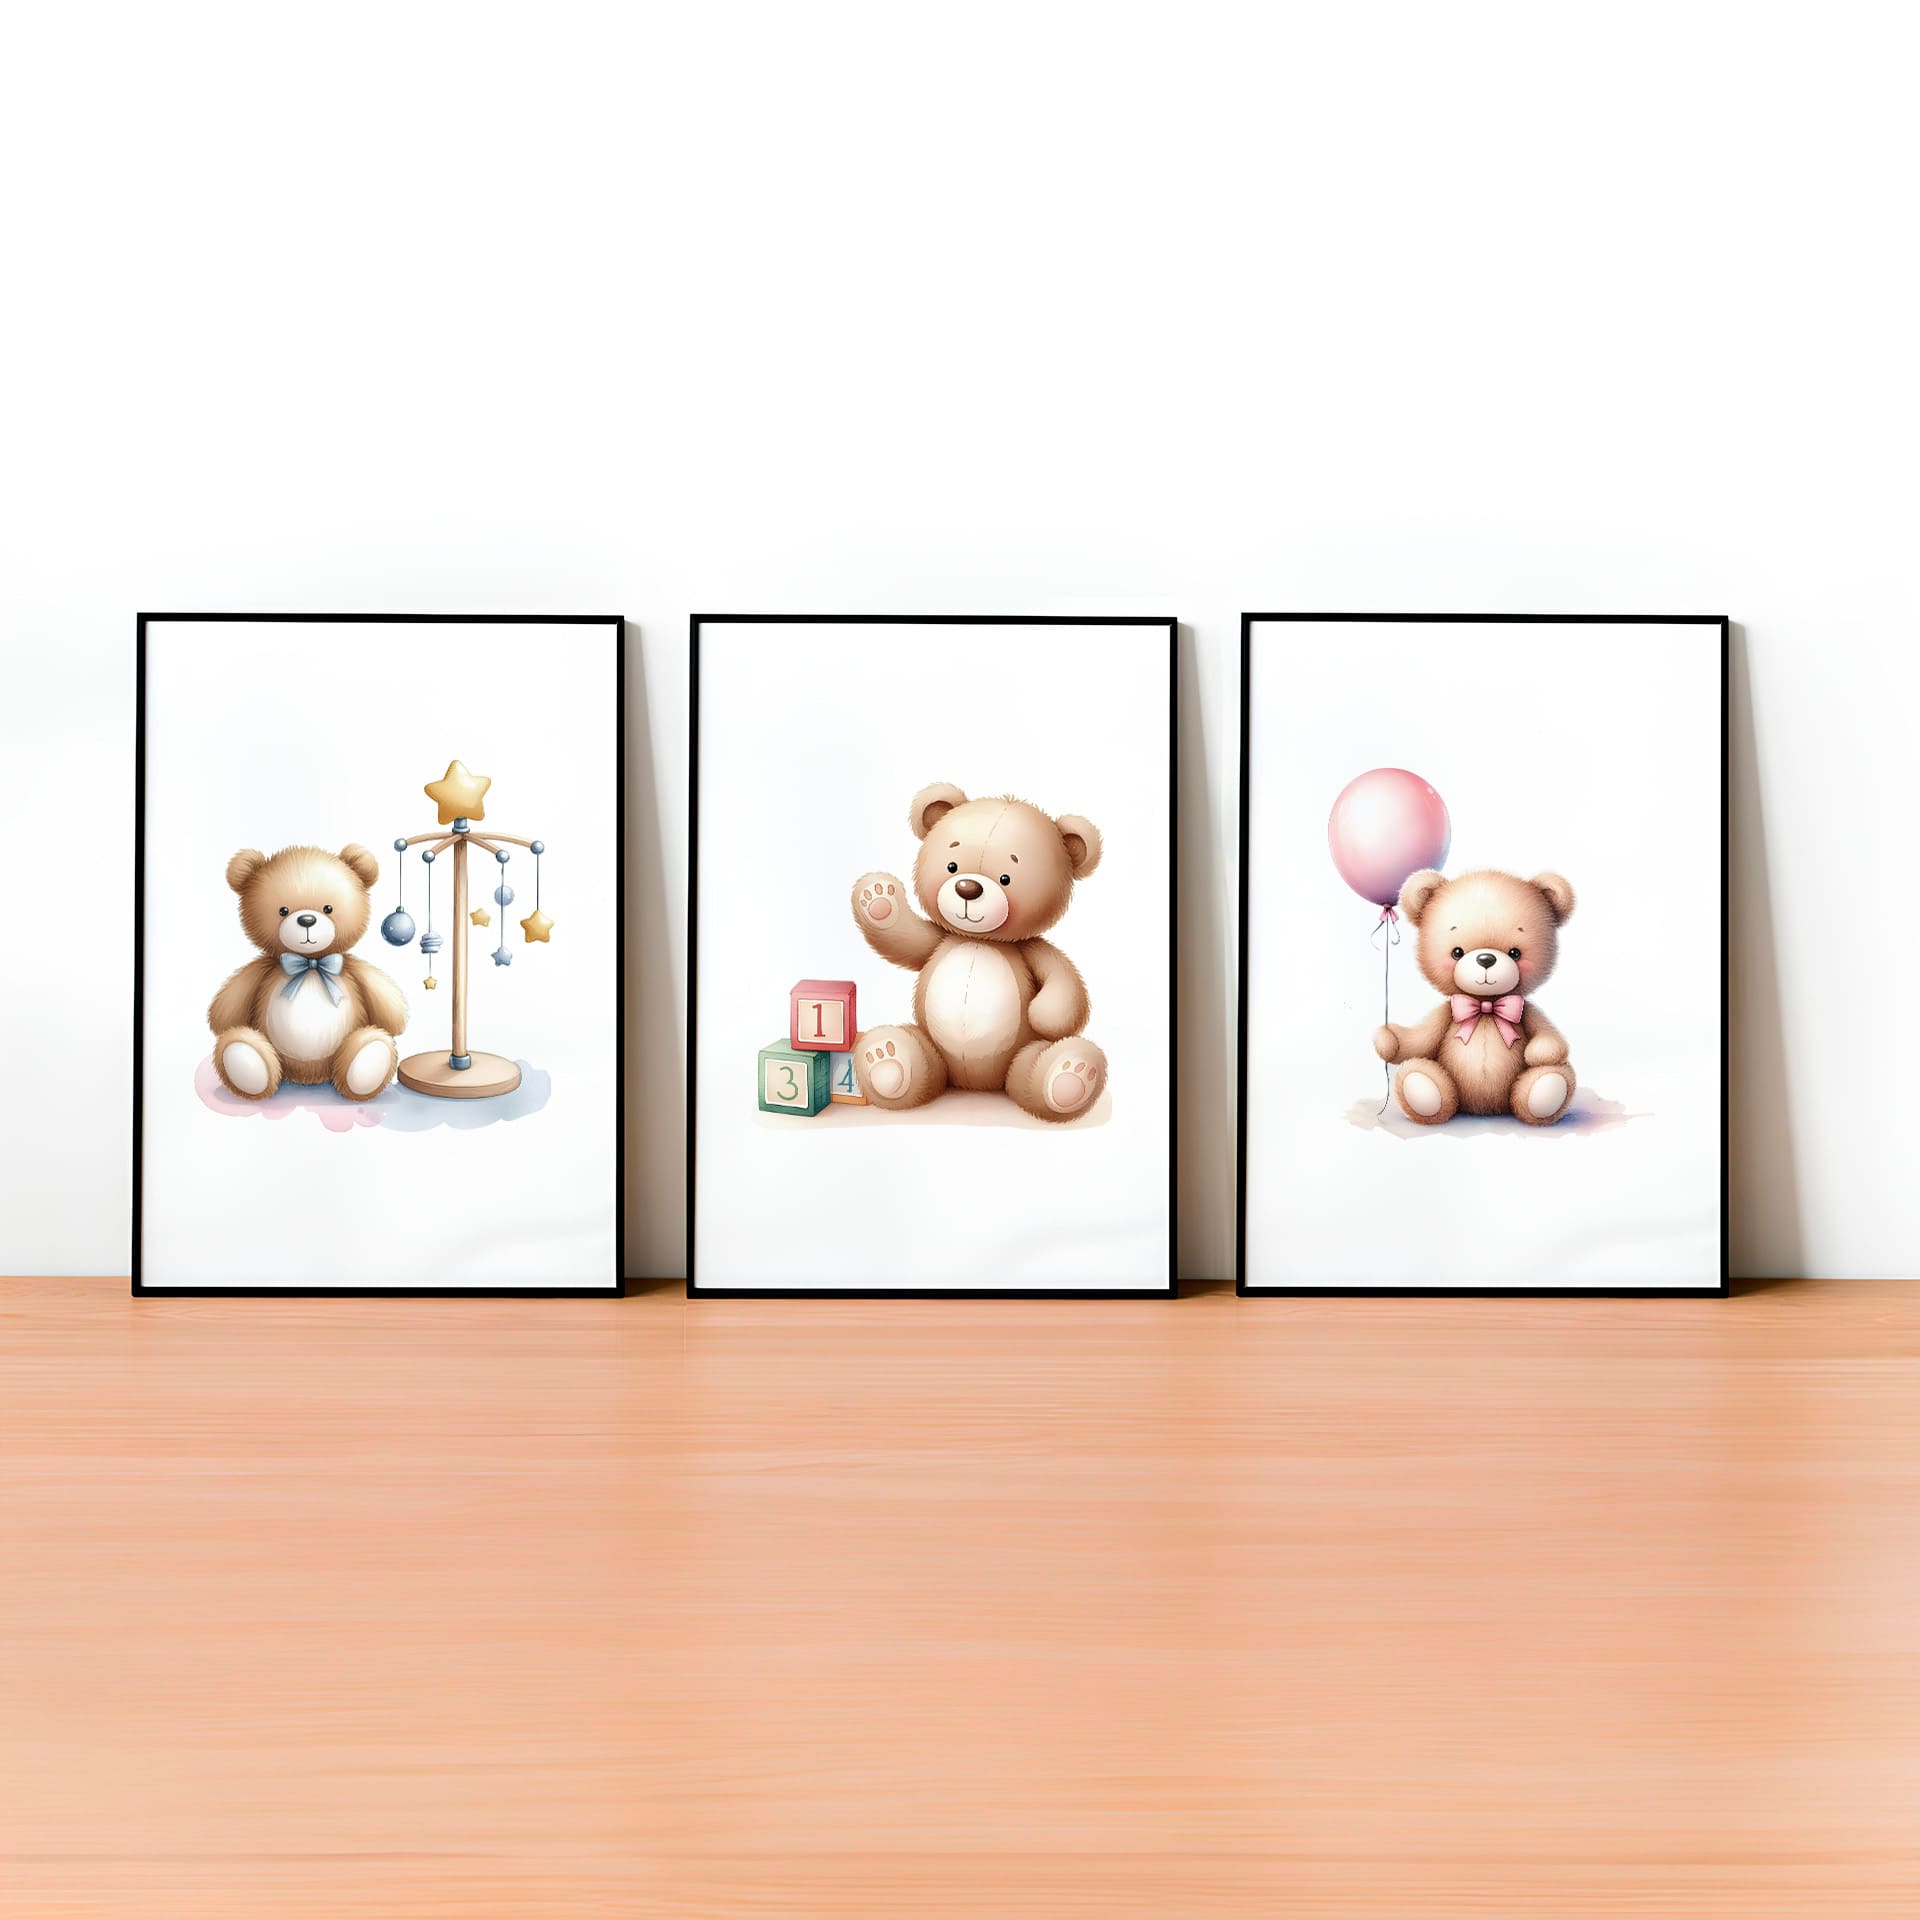 Set of three A4 prints in watercolour style. Each print depicts a teddy bear in a different scene: one teddy bear is holding a balloon, another is surrounded by counting blocks, and the third is near a mobile.